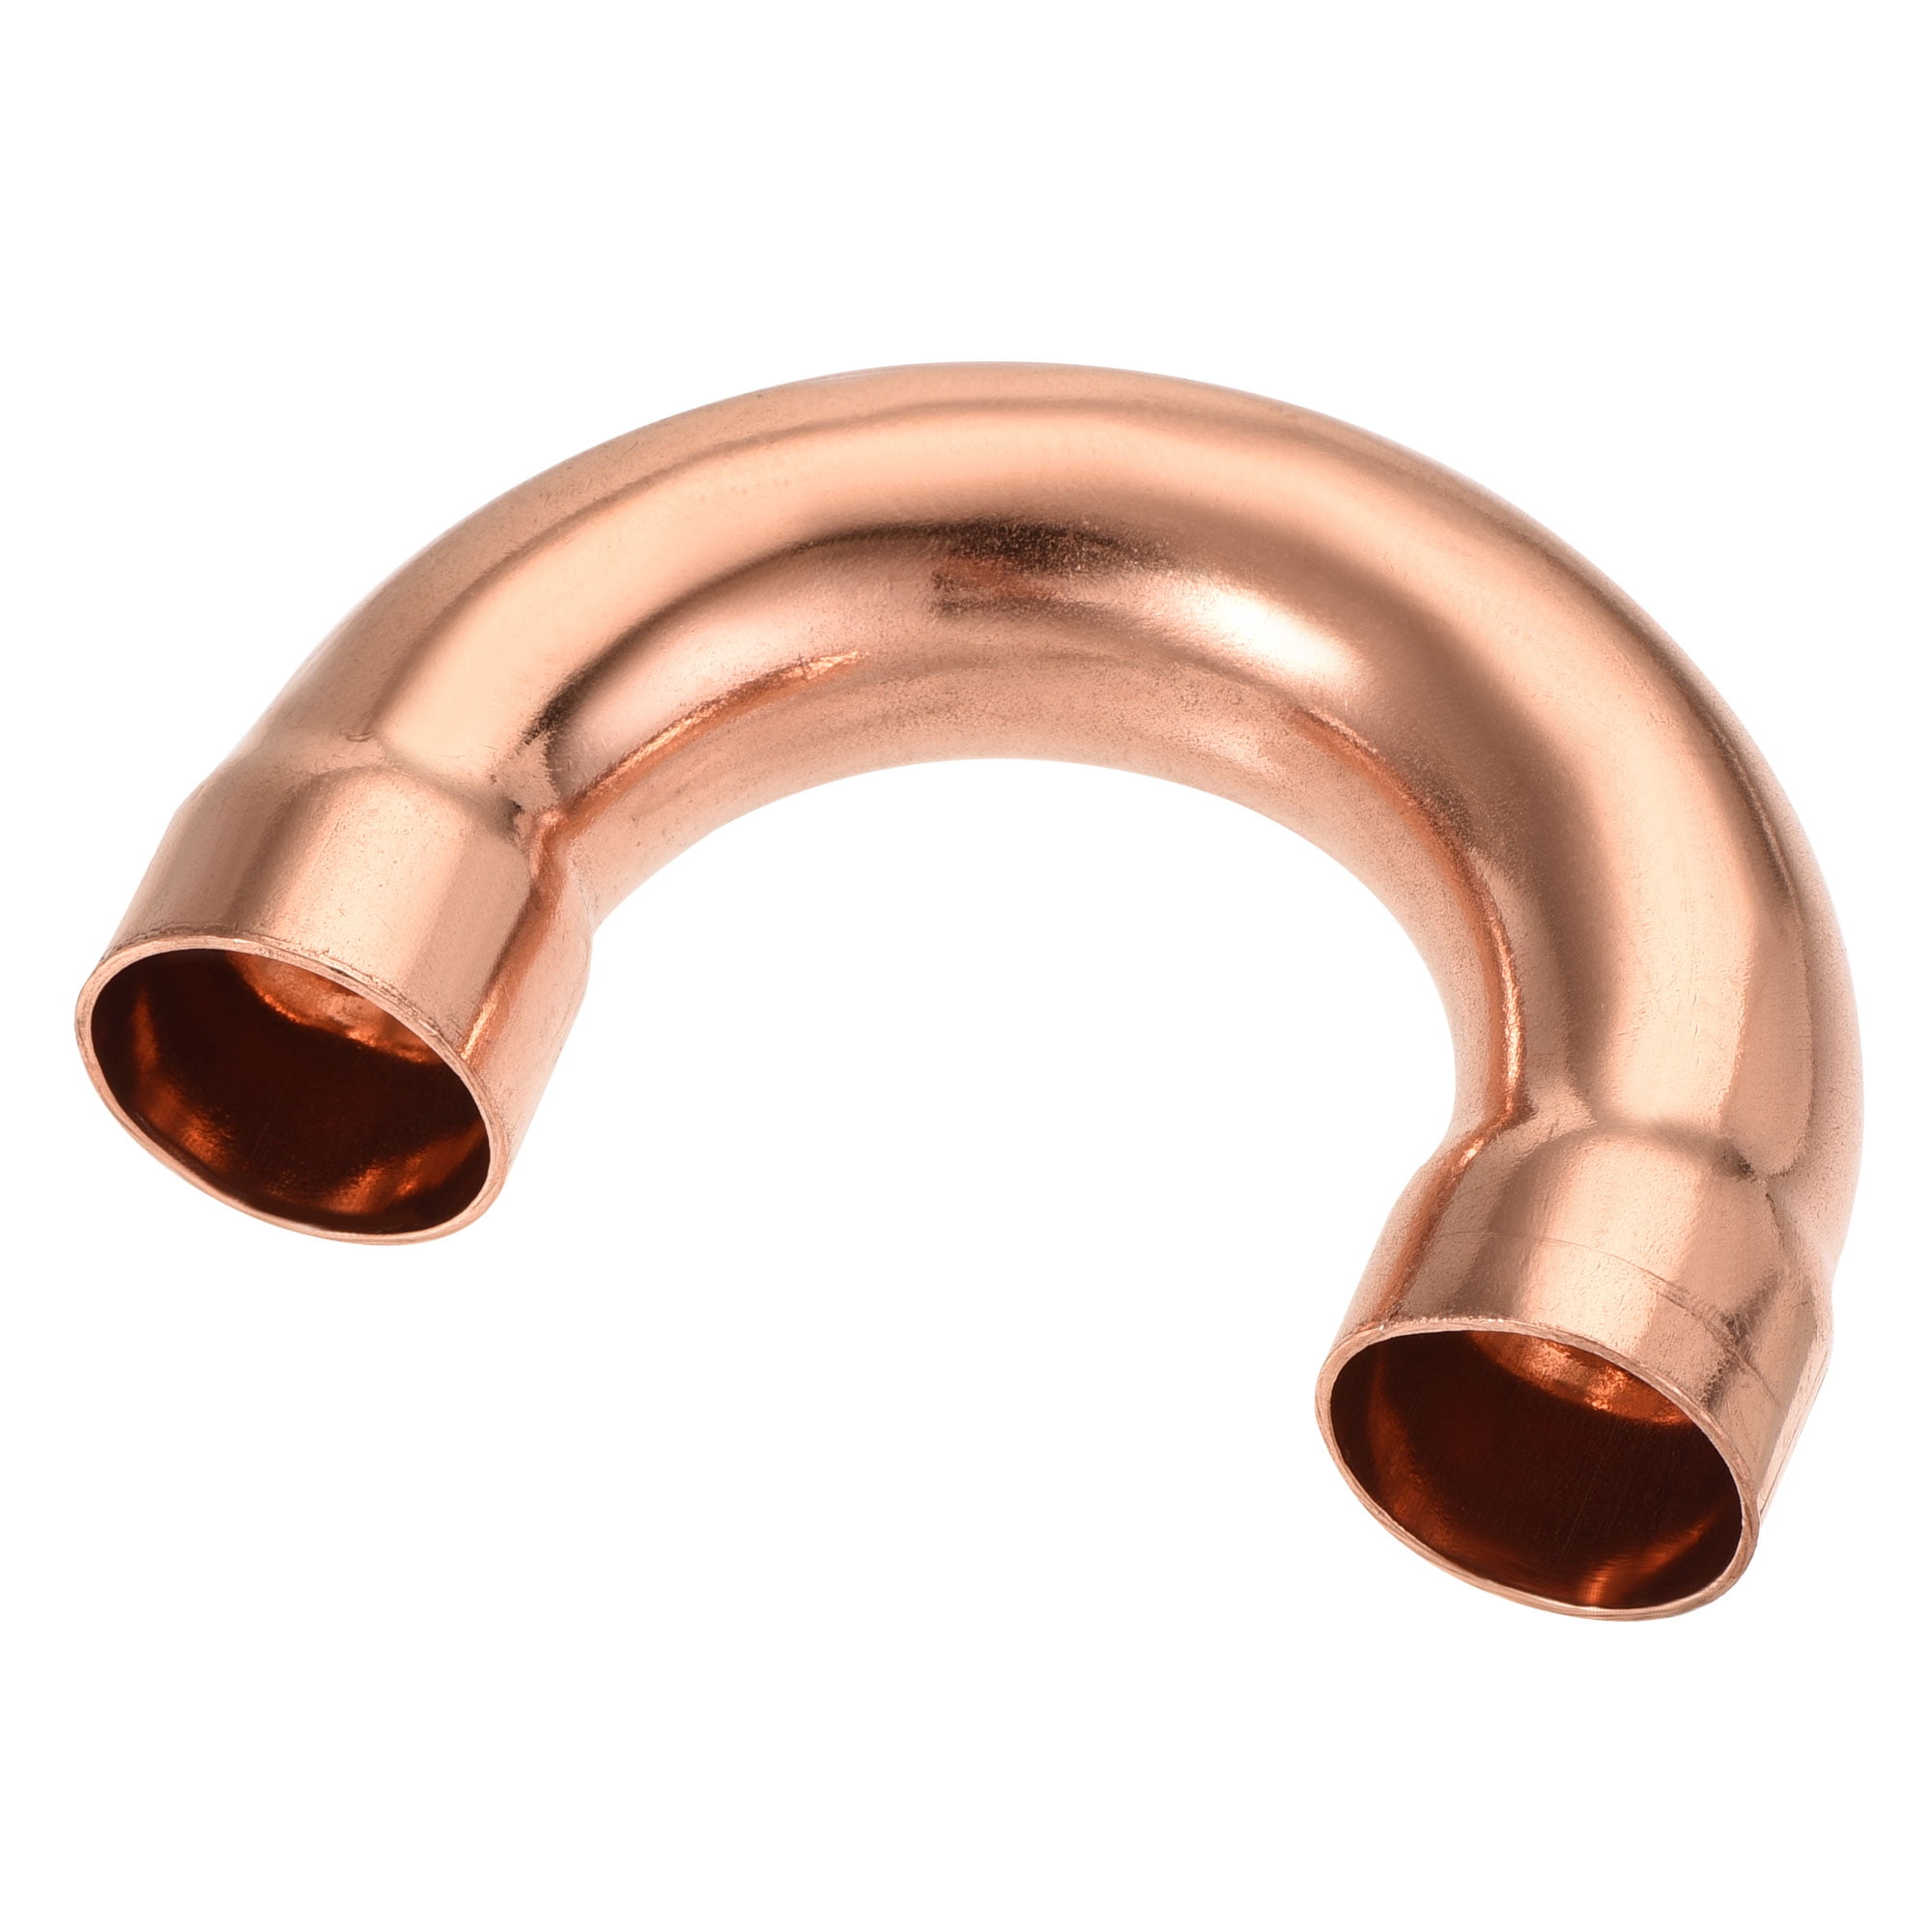 End Feed Fittings 15mm Return Bend/plumbing/copper pipe/copper tube. 